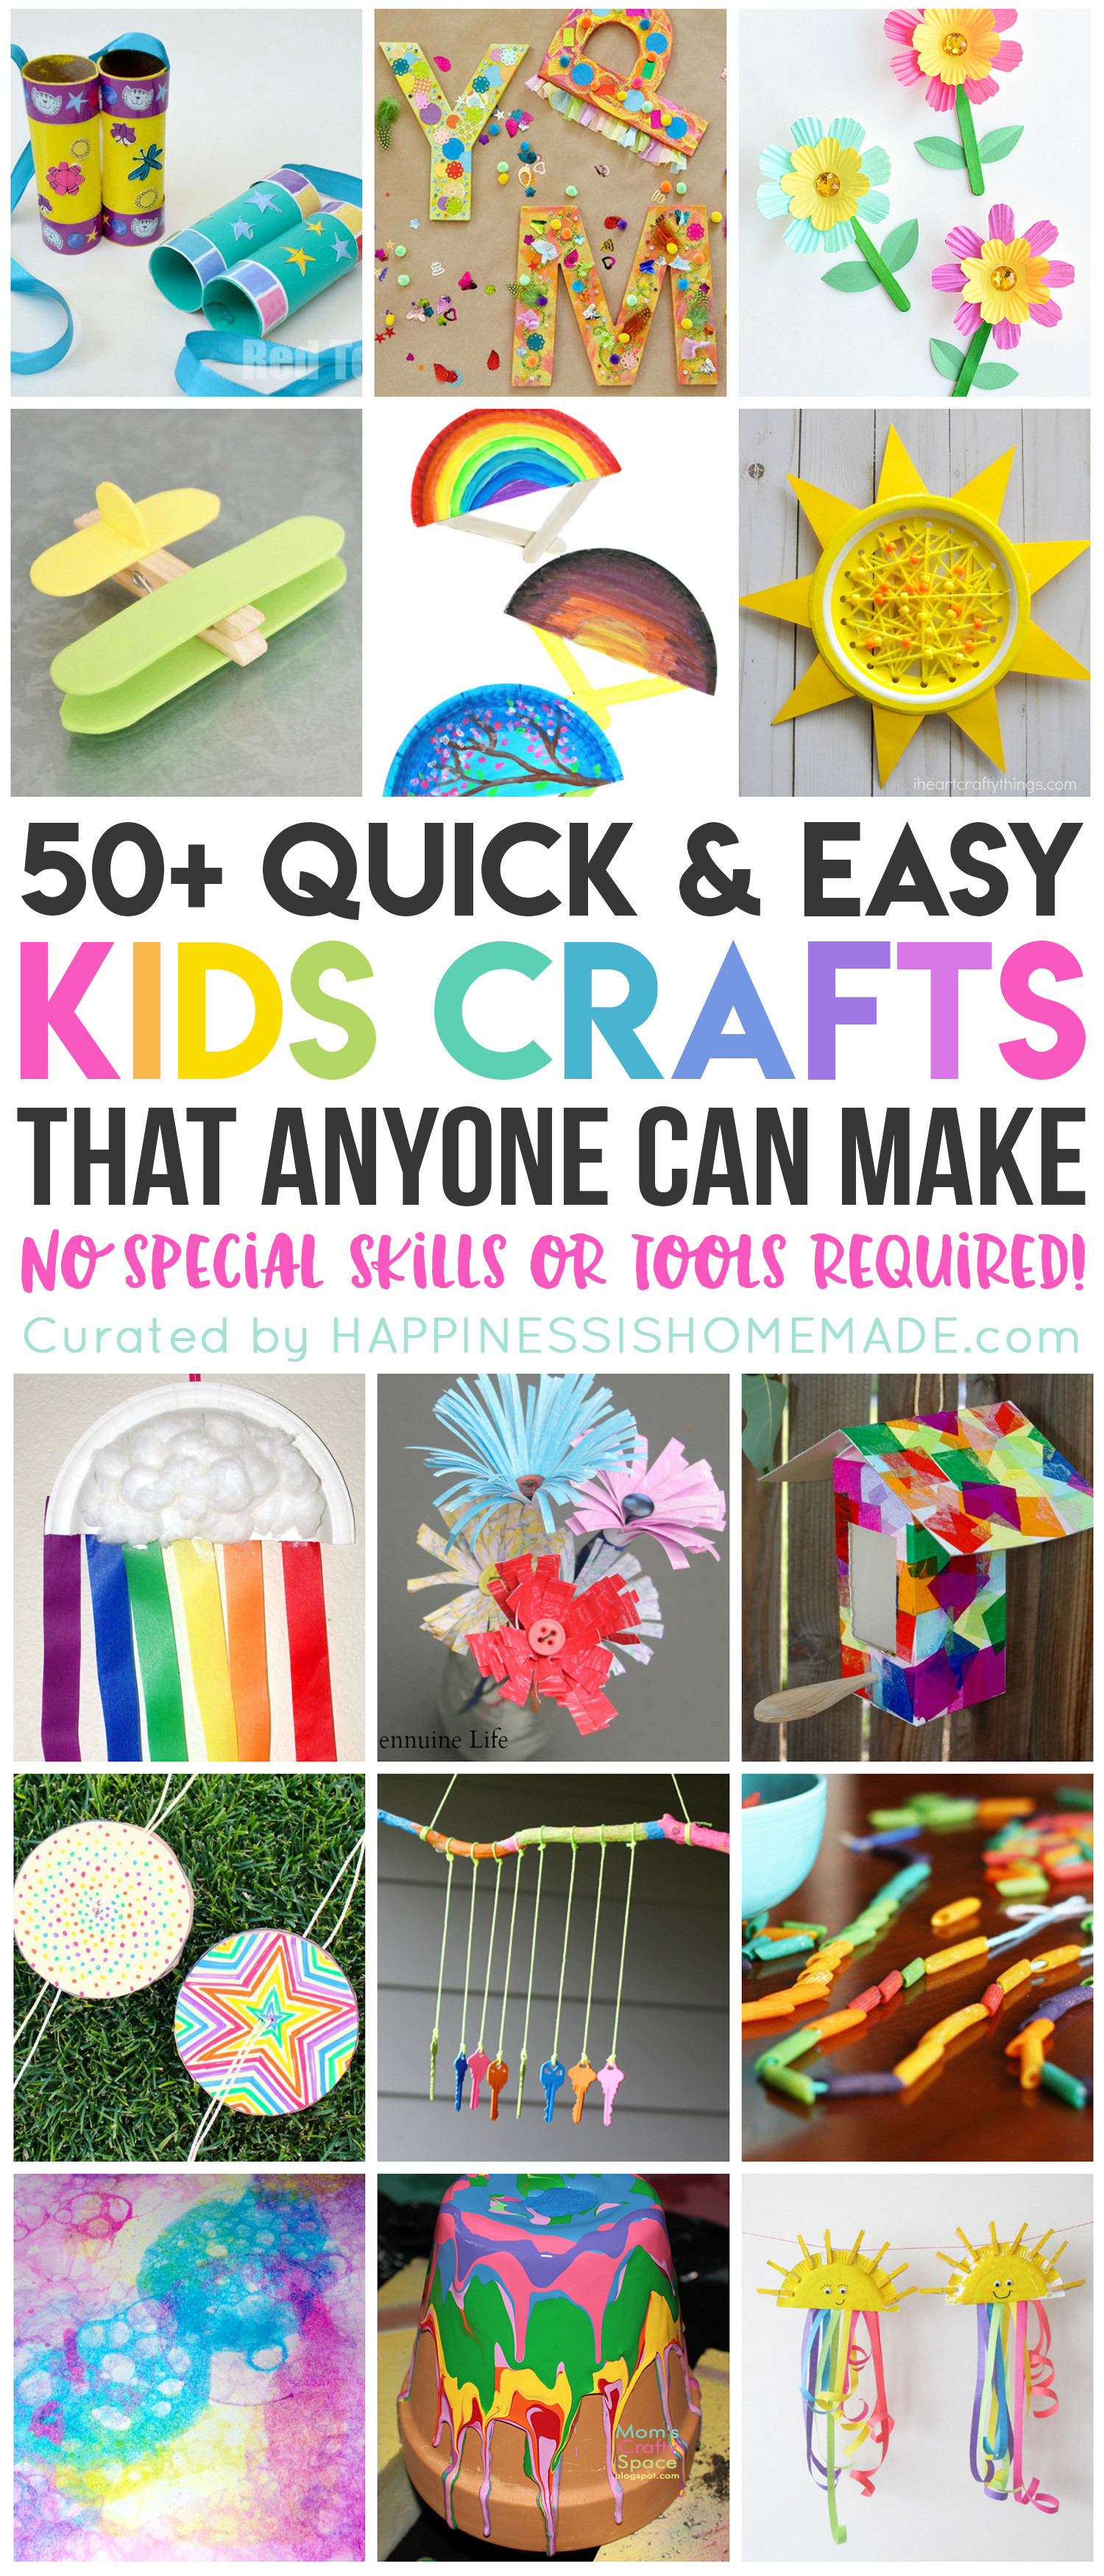 Easy Fun Crafts For Toddlers
 50 Quick & Easy Kids Crafts that ANYONE Can Make